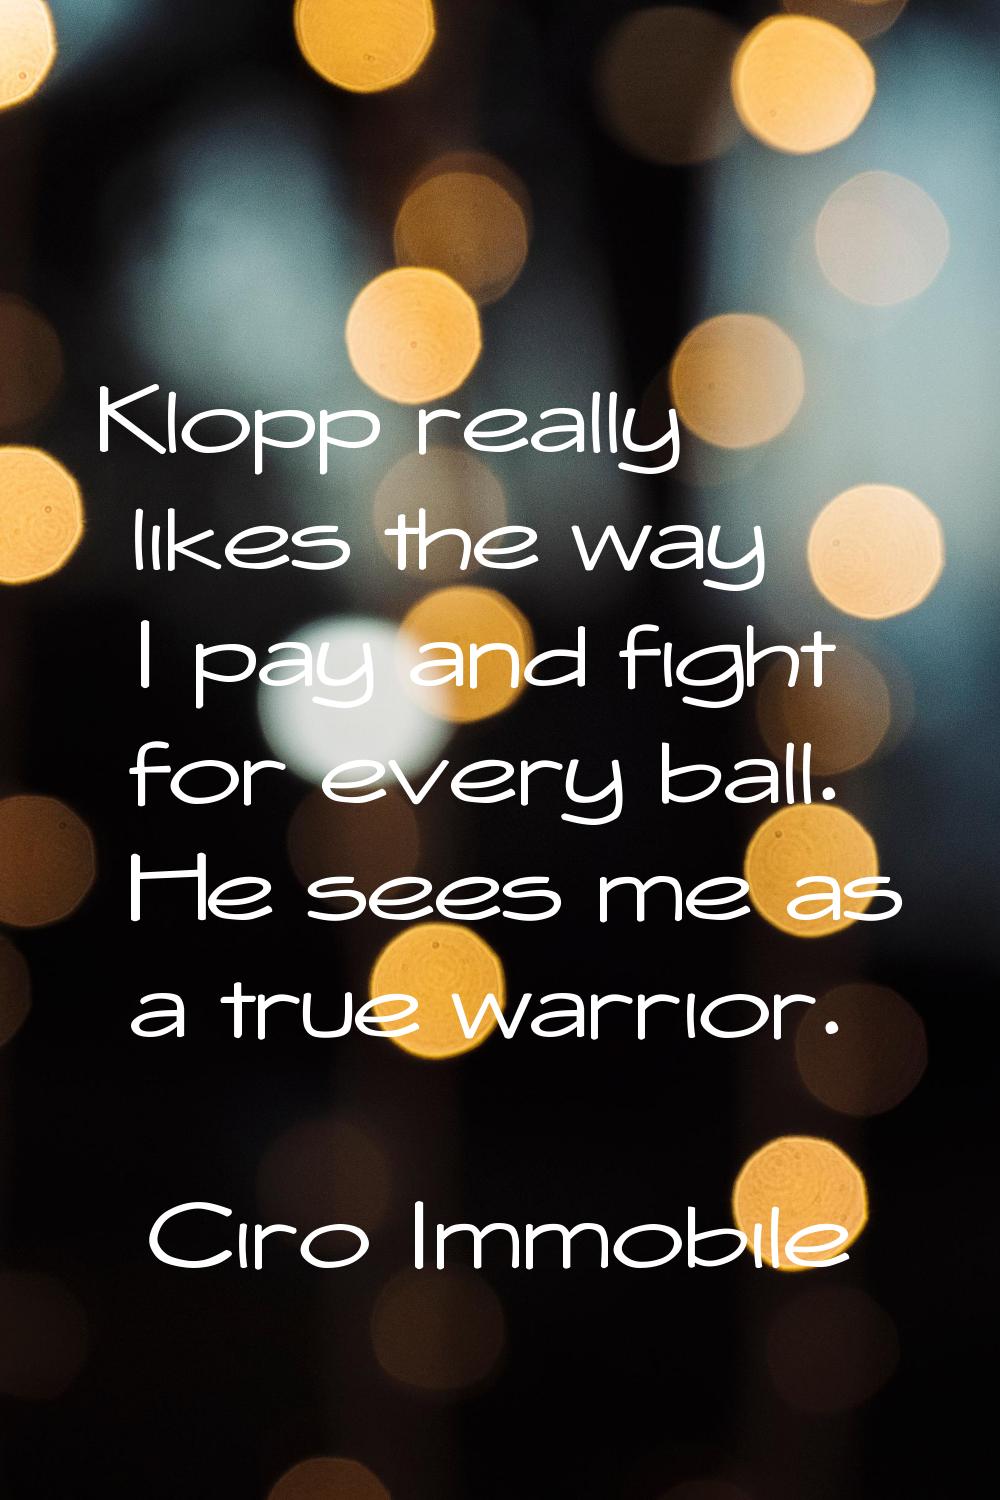 Klopp really likes the way I pay and fight for every ball. He sees me as a true warrior.